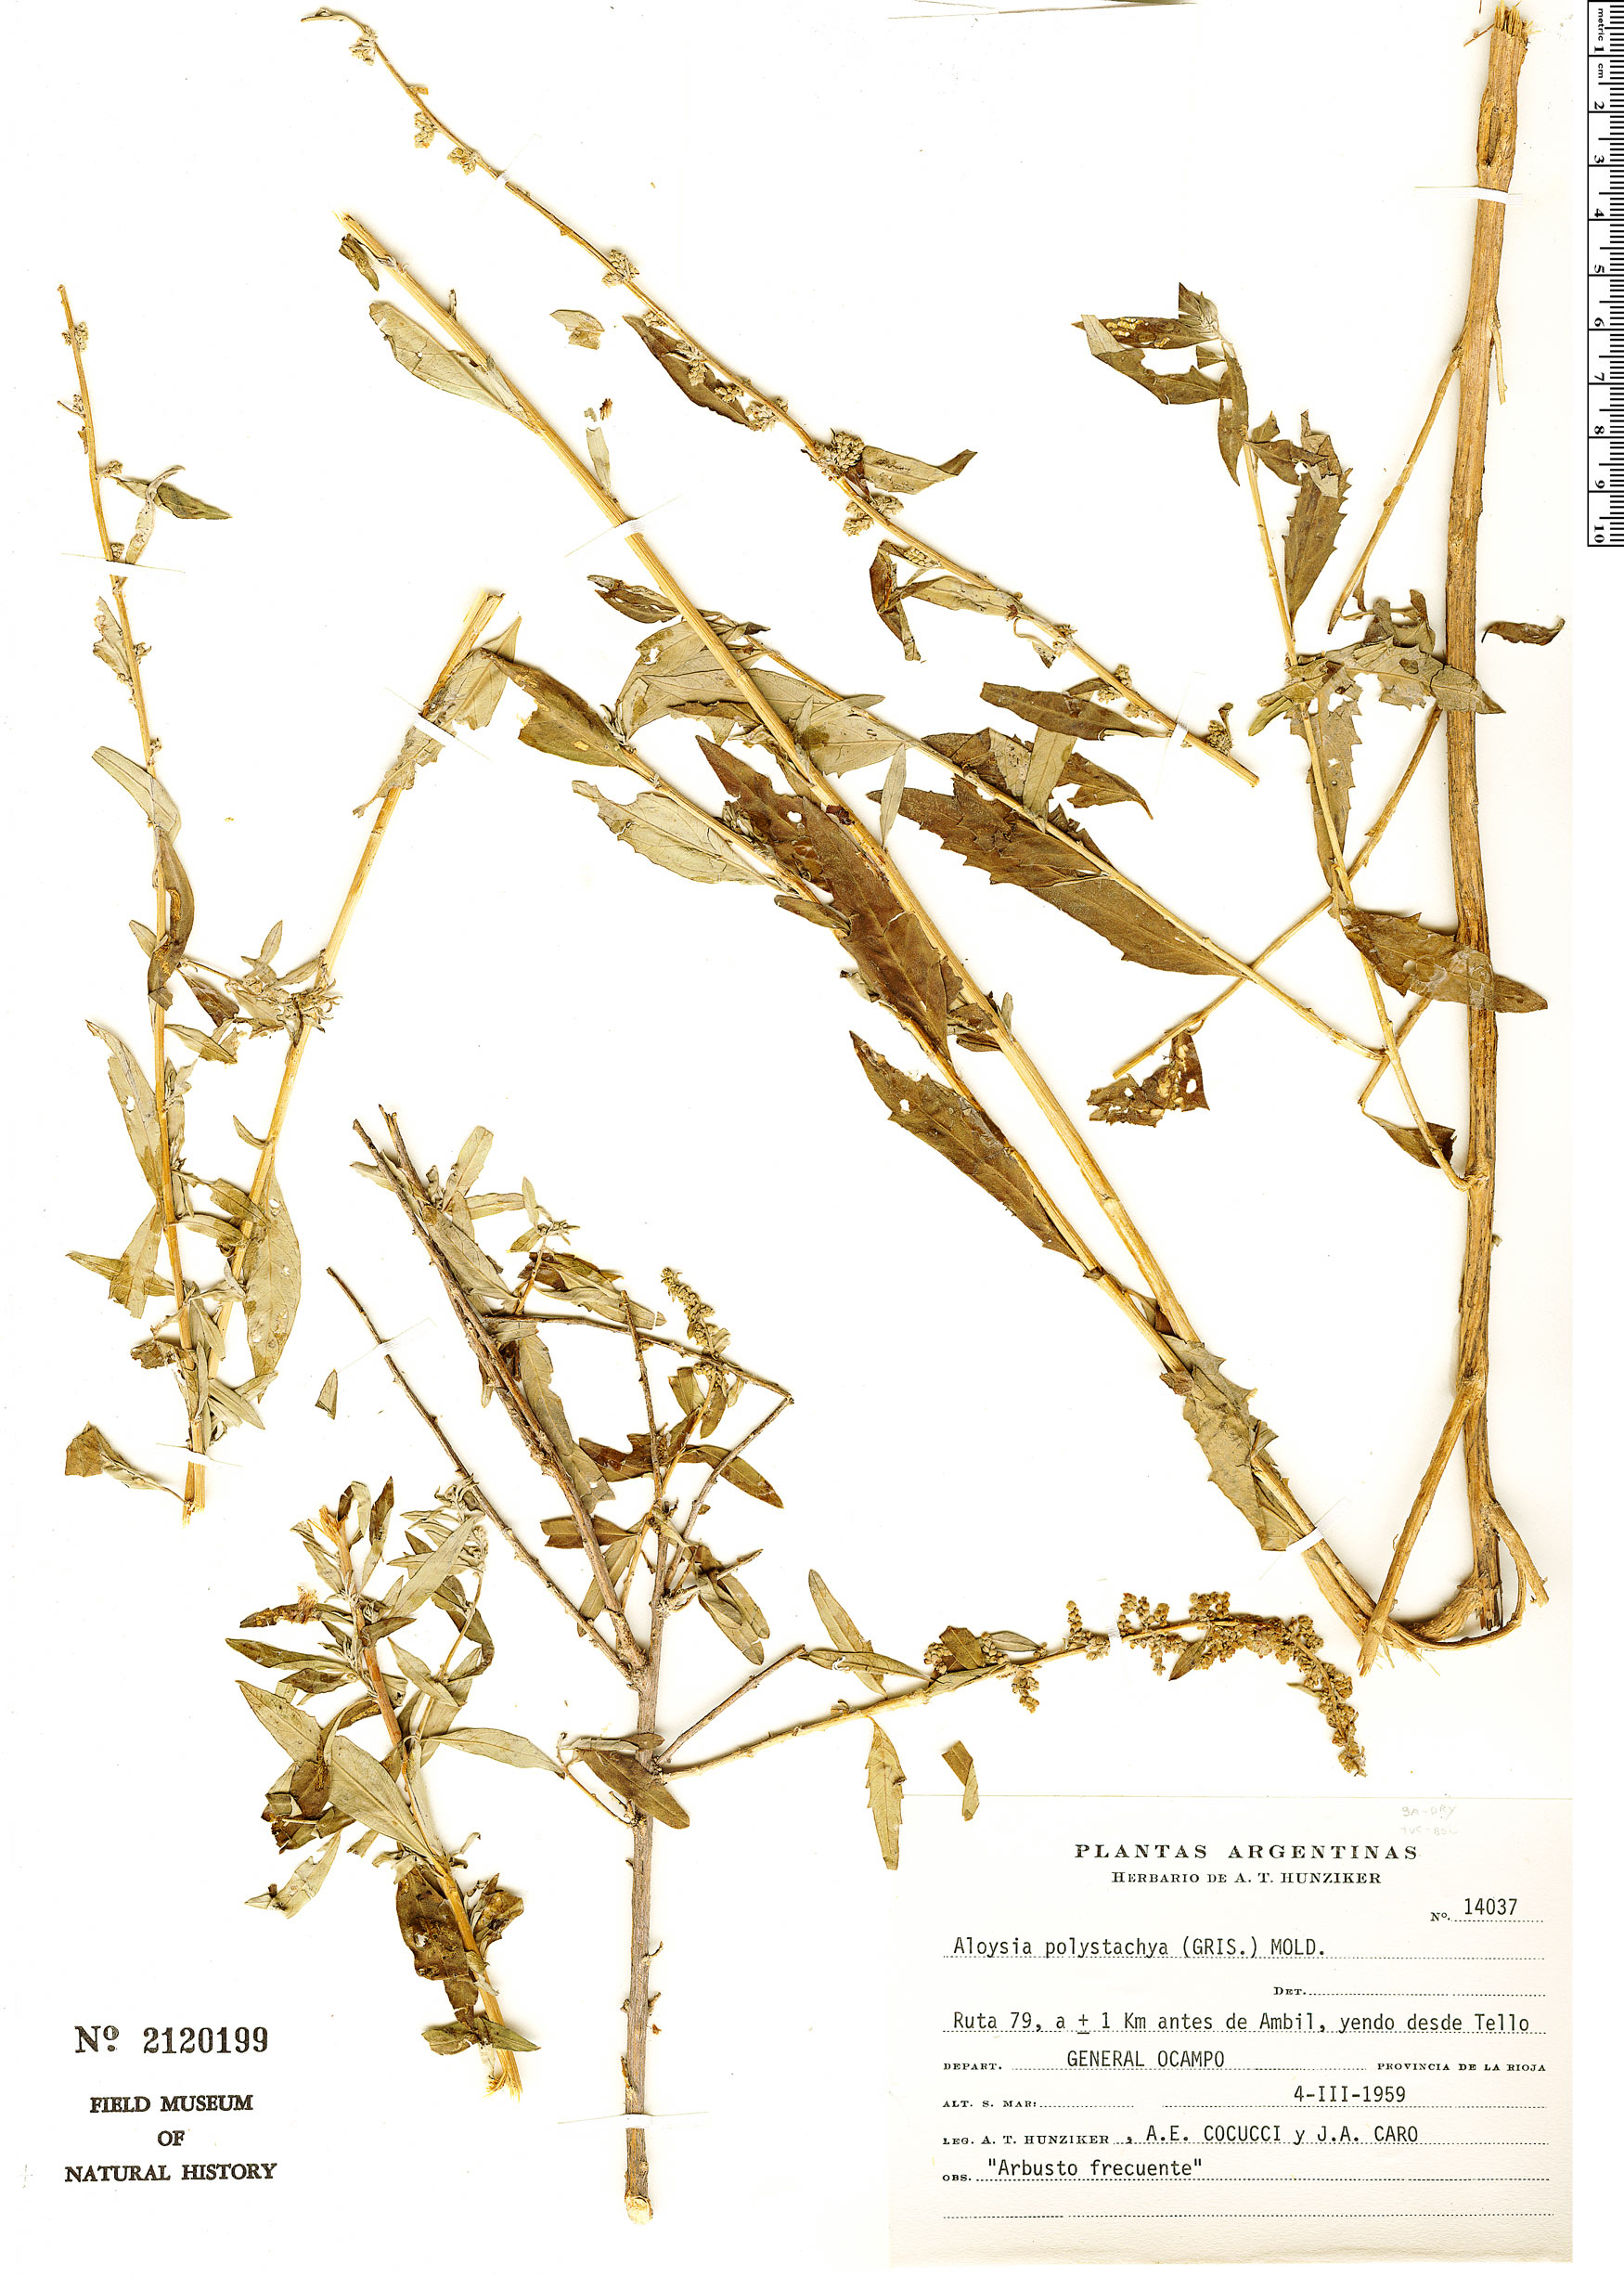 aloysia-polystachya-rapid-reference-the-field-museum